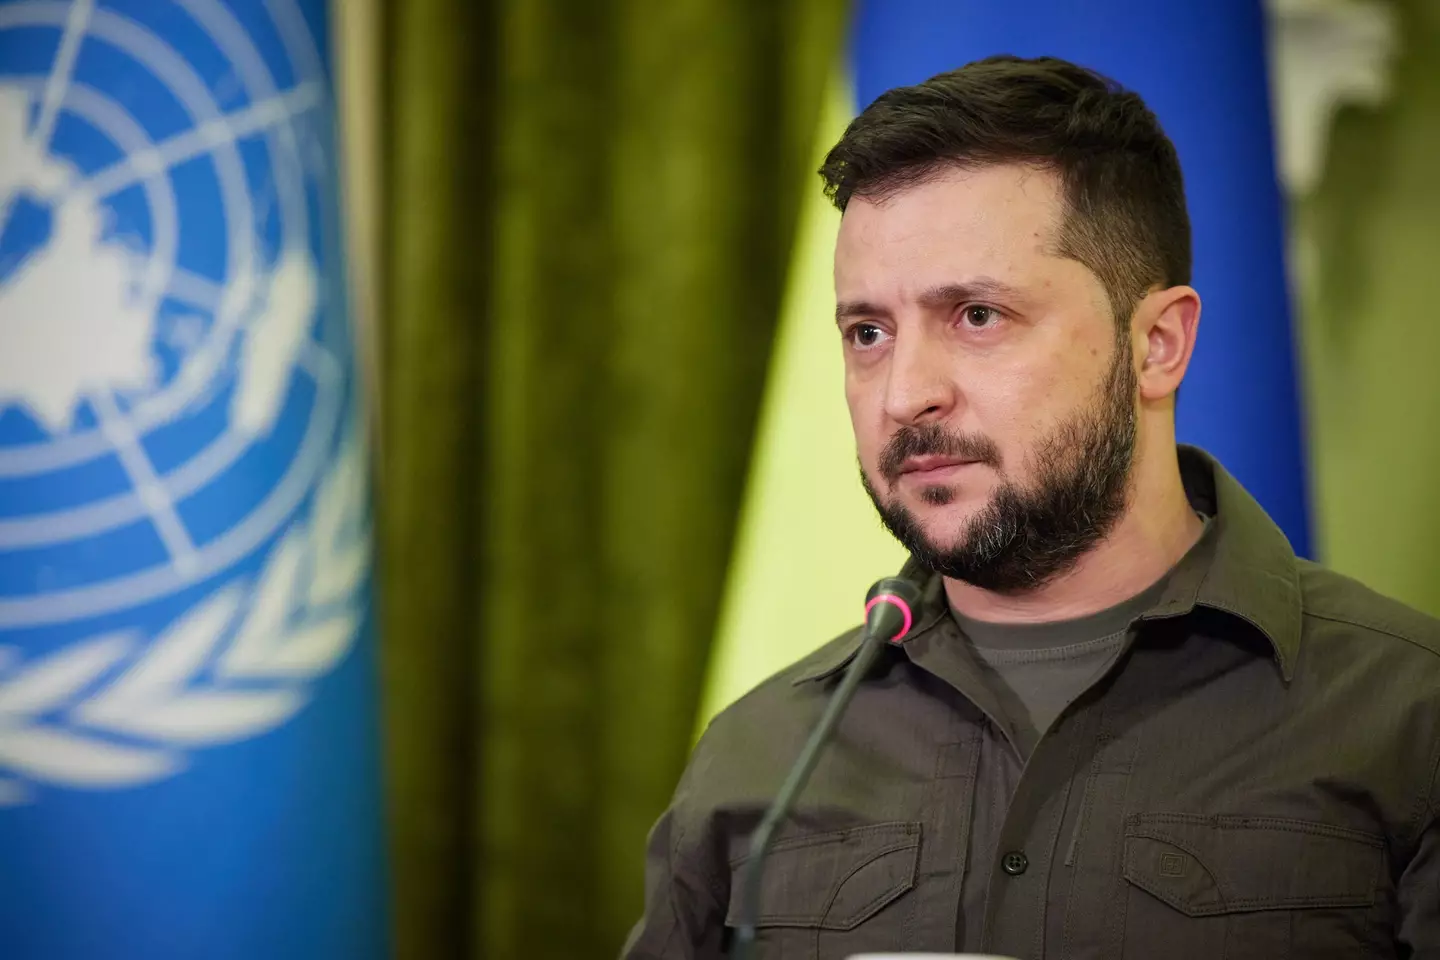 Zelenskyy claims Russia has committed war crimes on Ukrainian soil.